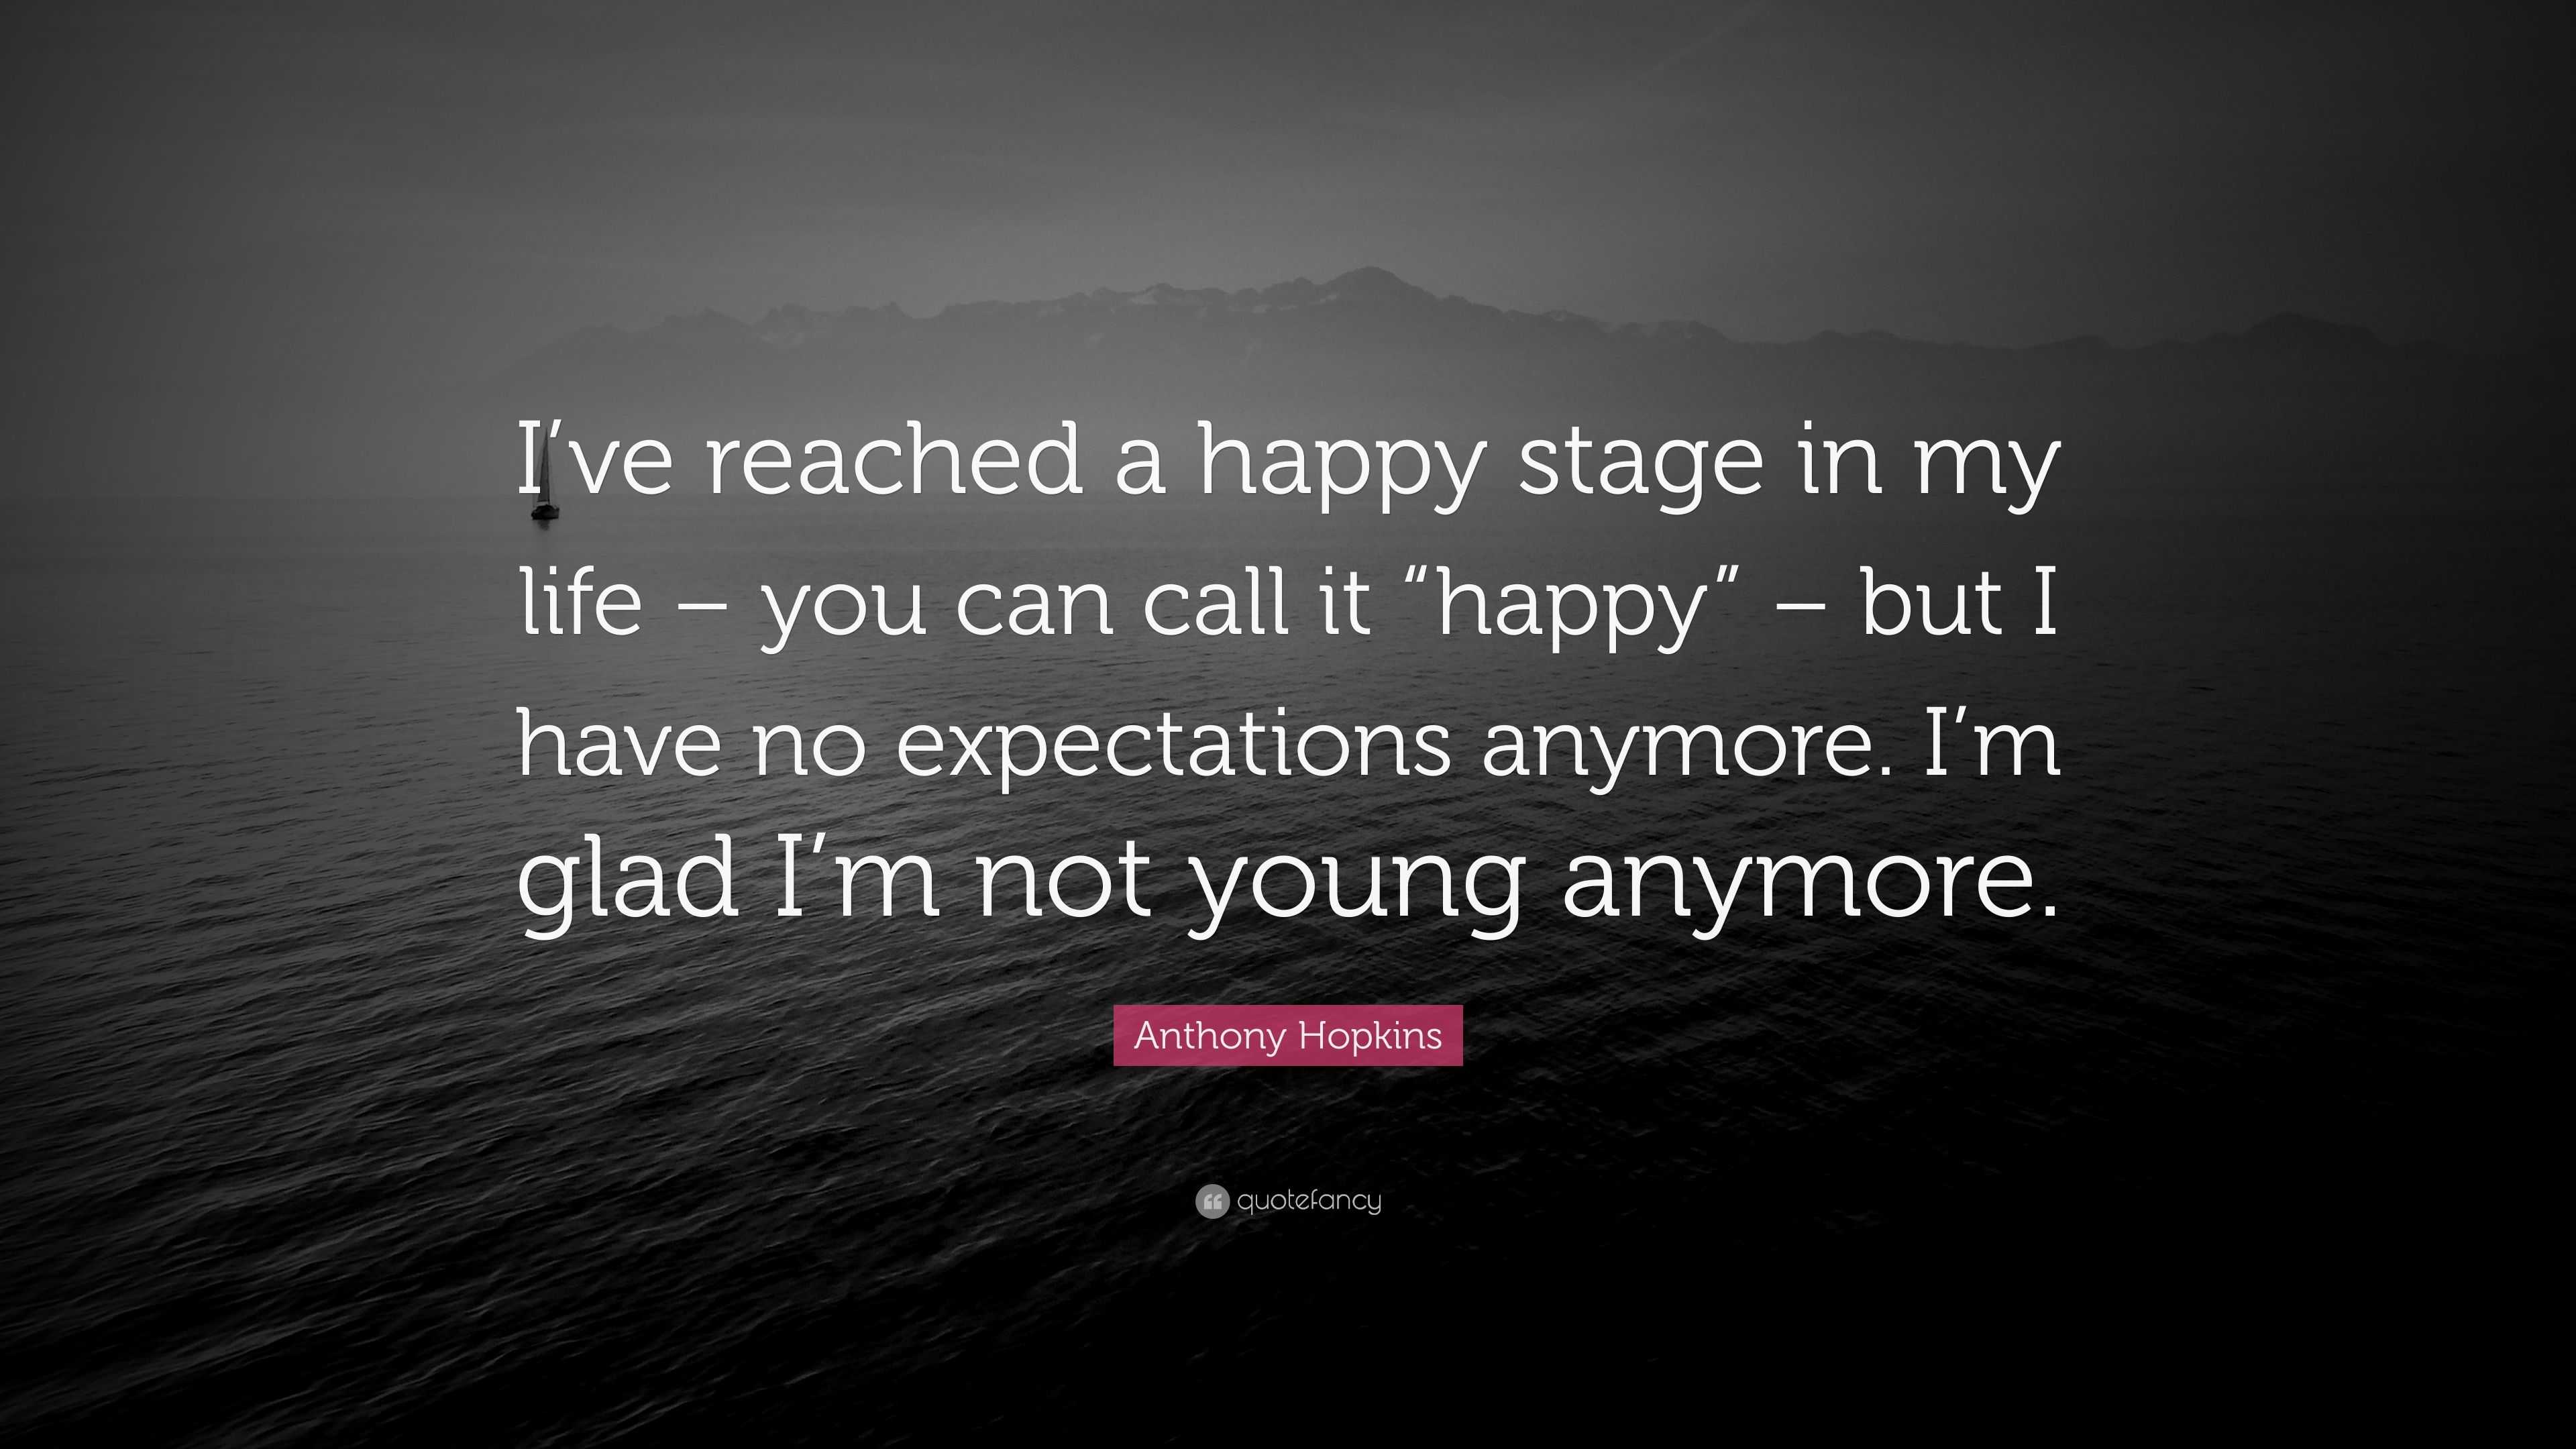 Anthony Hopkins Quote I Ve Reached A Happy Stage In My Life You Can Call It Happy But I Have No Expectations Anymore I M Glad I M Not Y